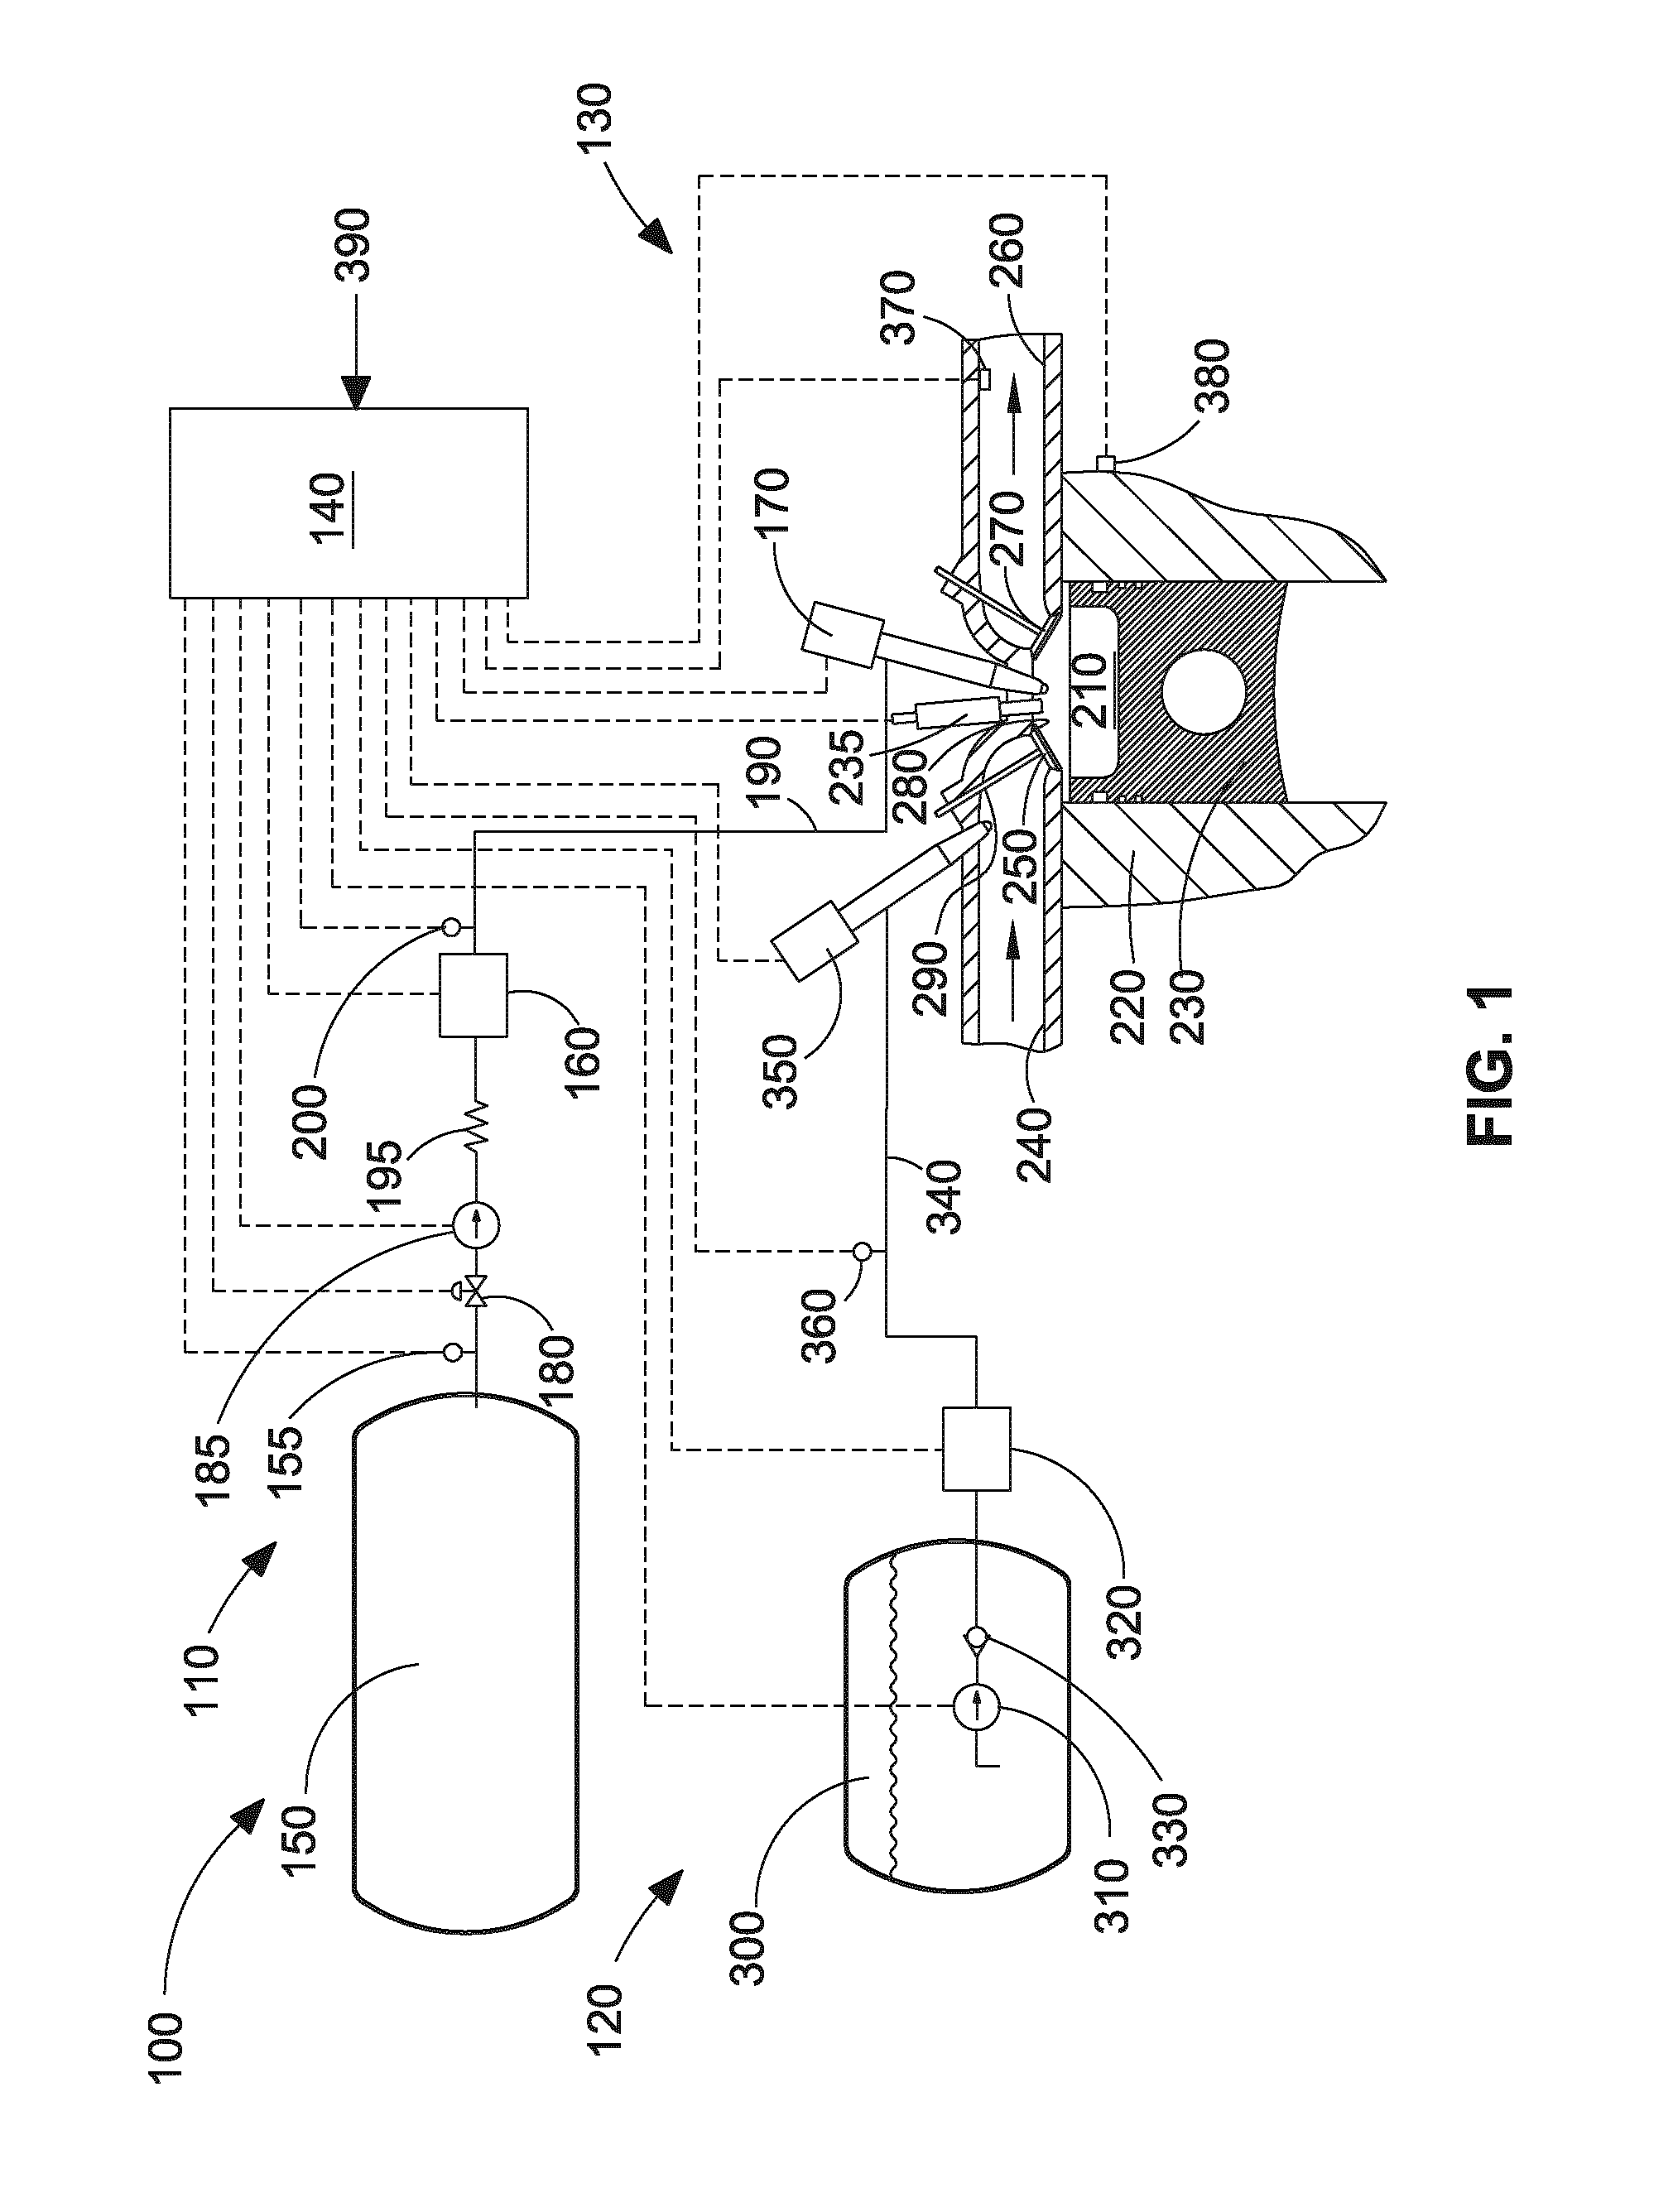 Apparatus And Method For Fuelling A Flexible-Fuel Internal Combustion Engine